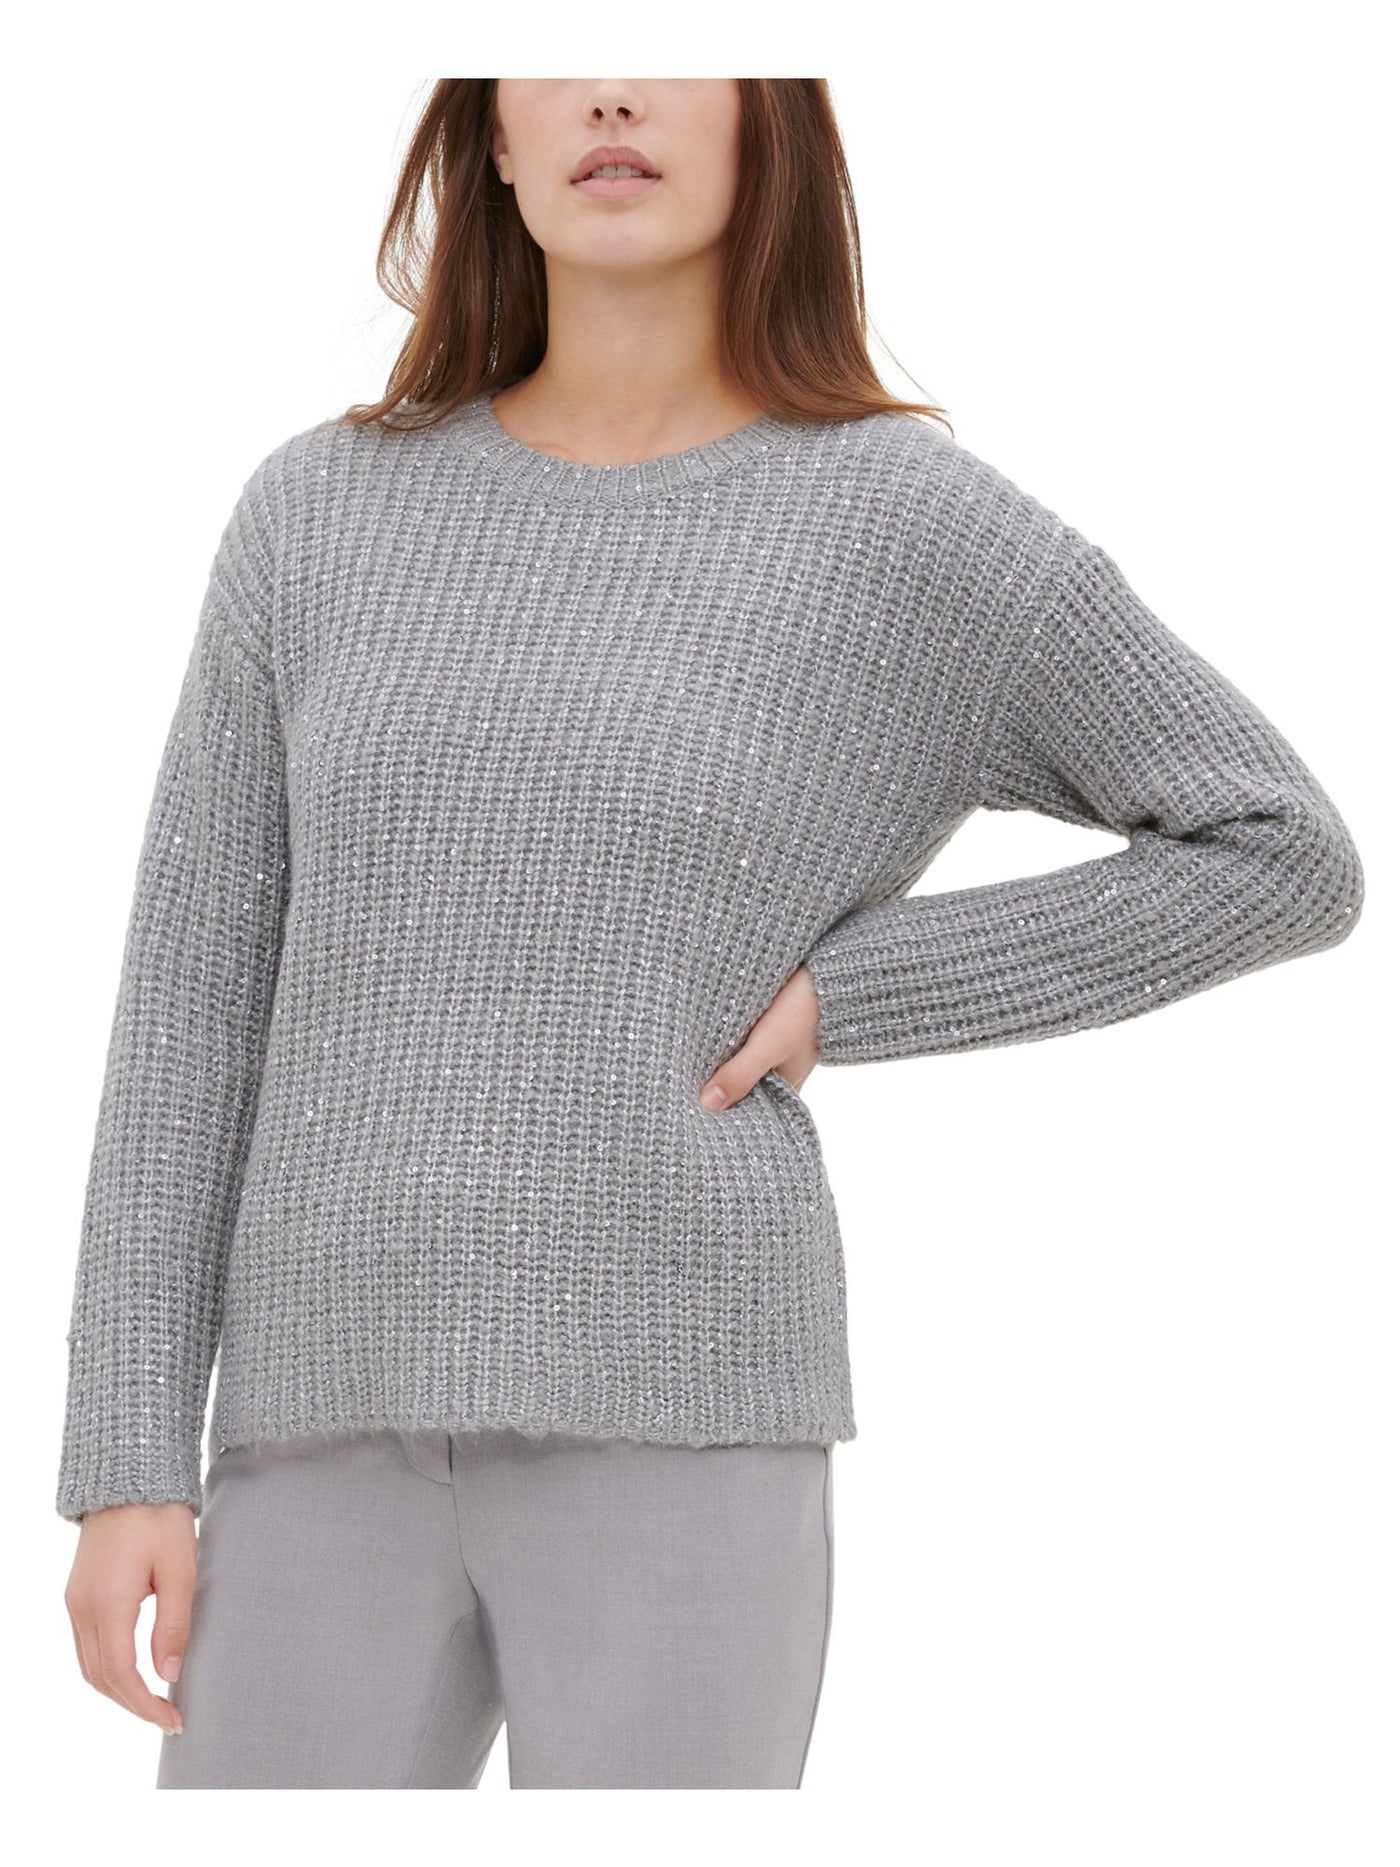 CALVIN KLEIN Womens Knitted Long Sleeve Crew Neck Sweater